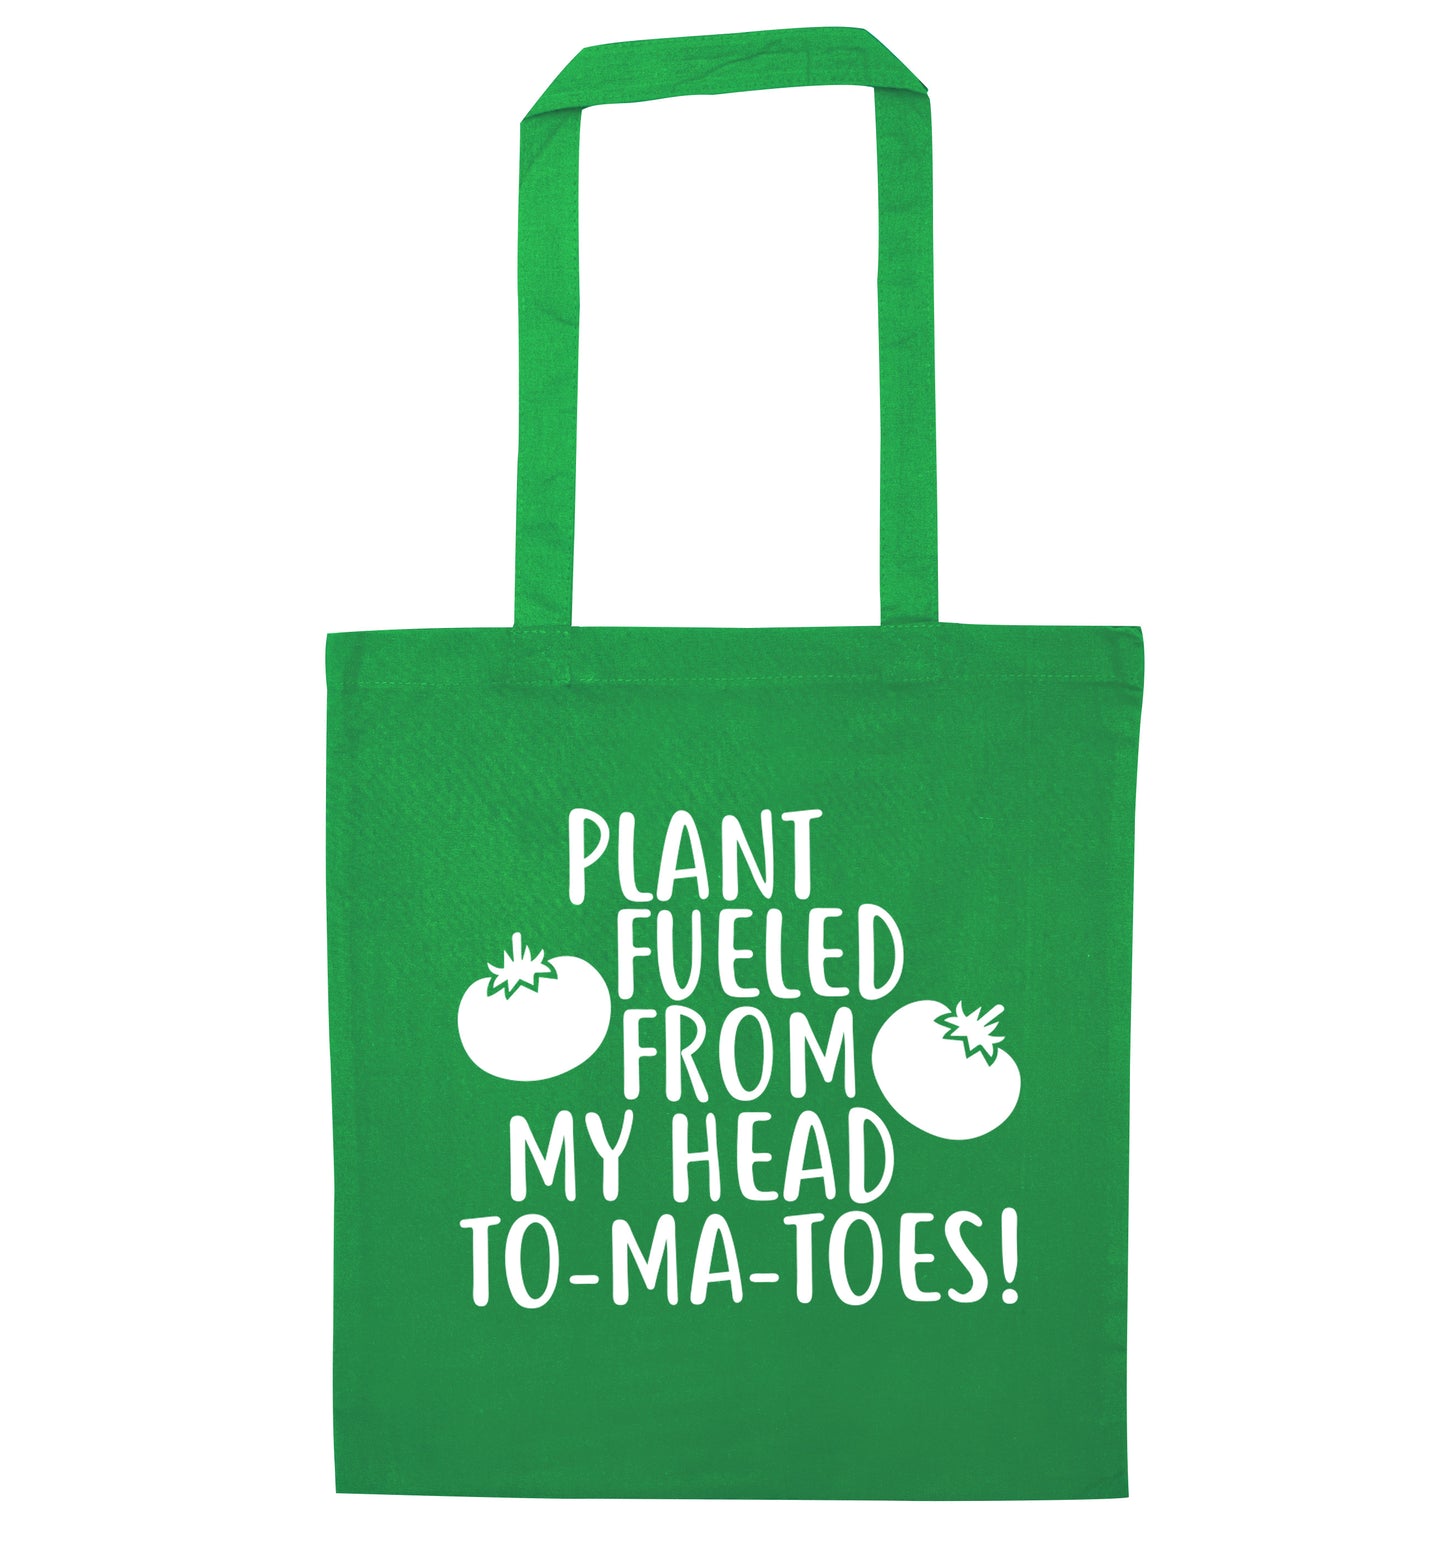 Plant fueled from my head to-ma-toes green tote bag